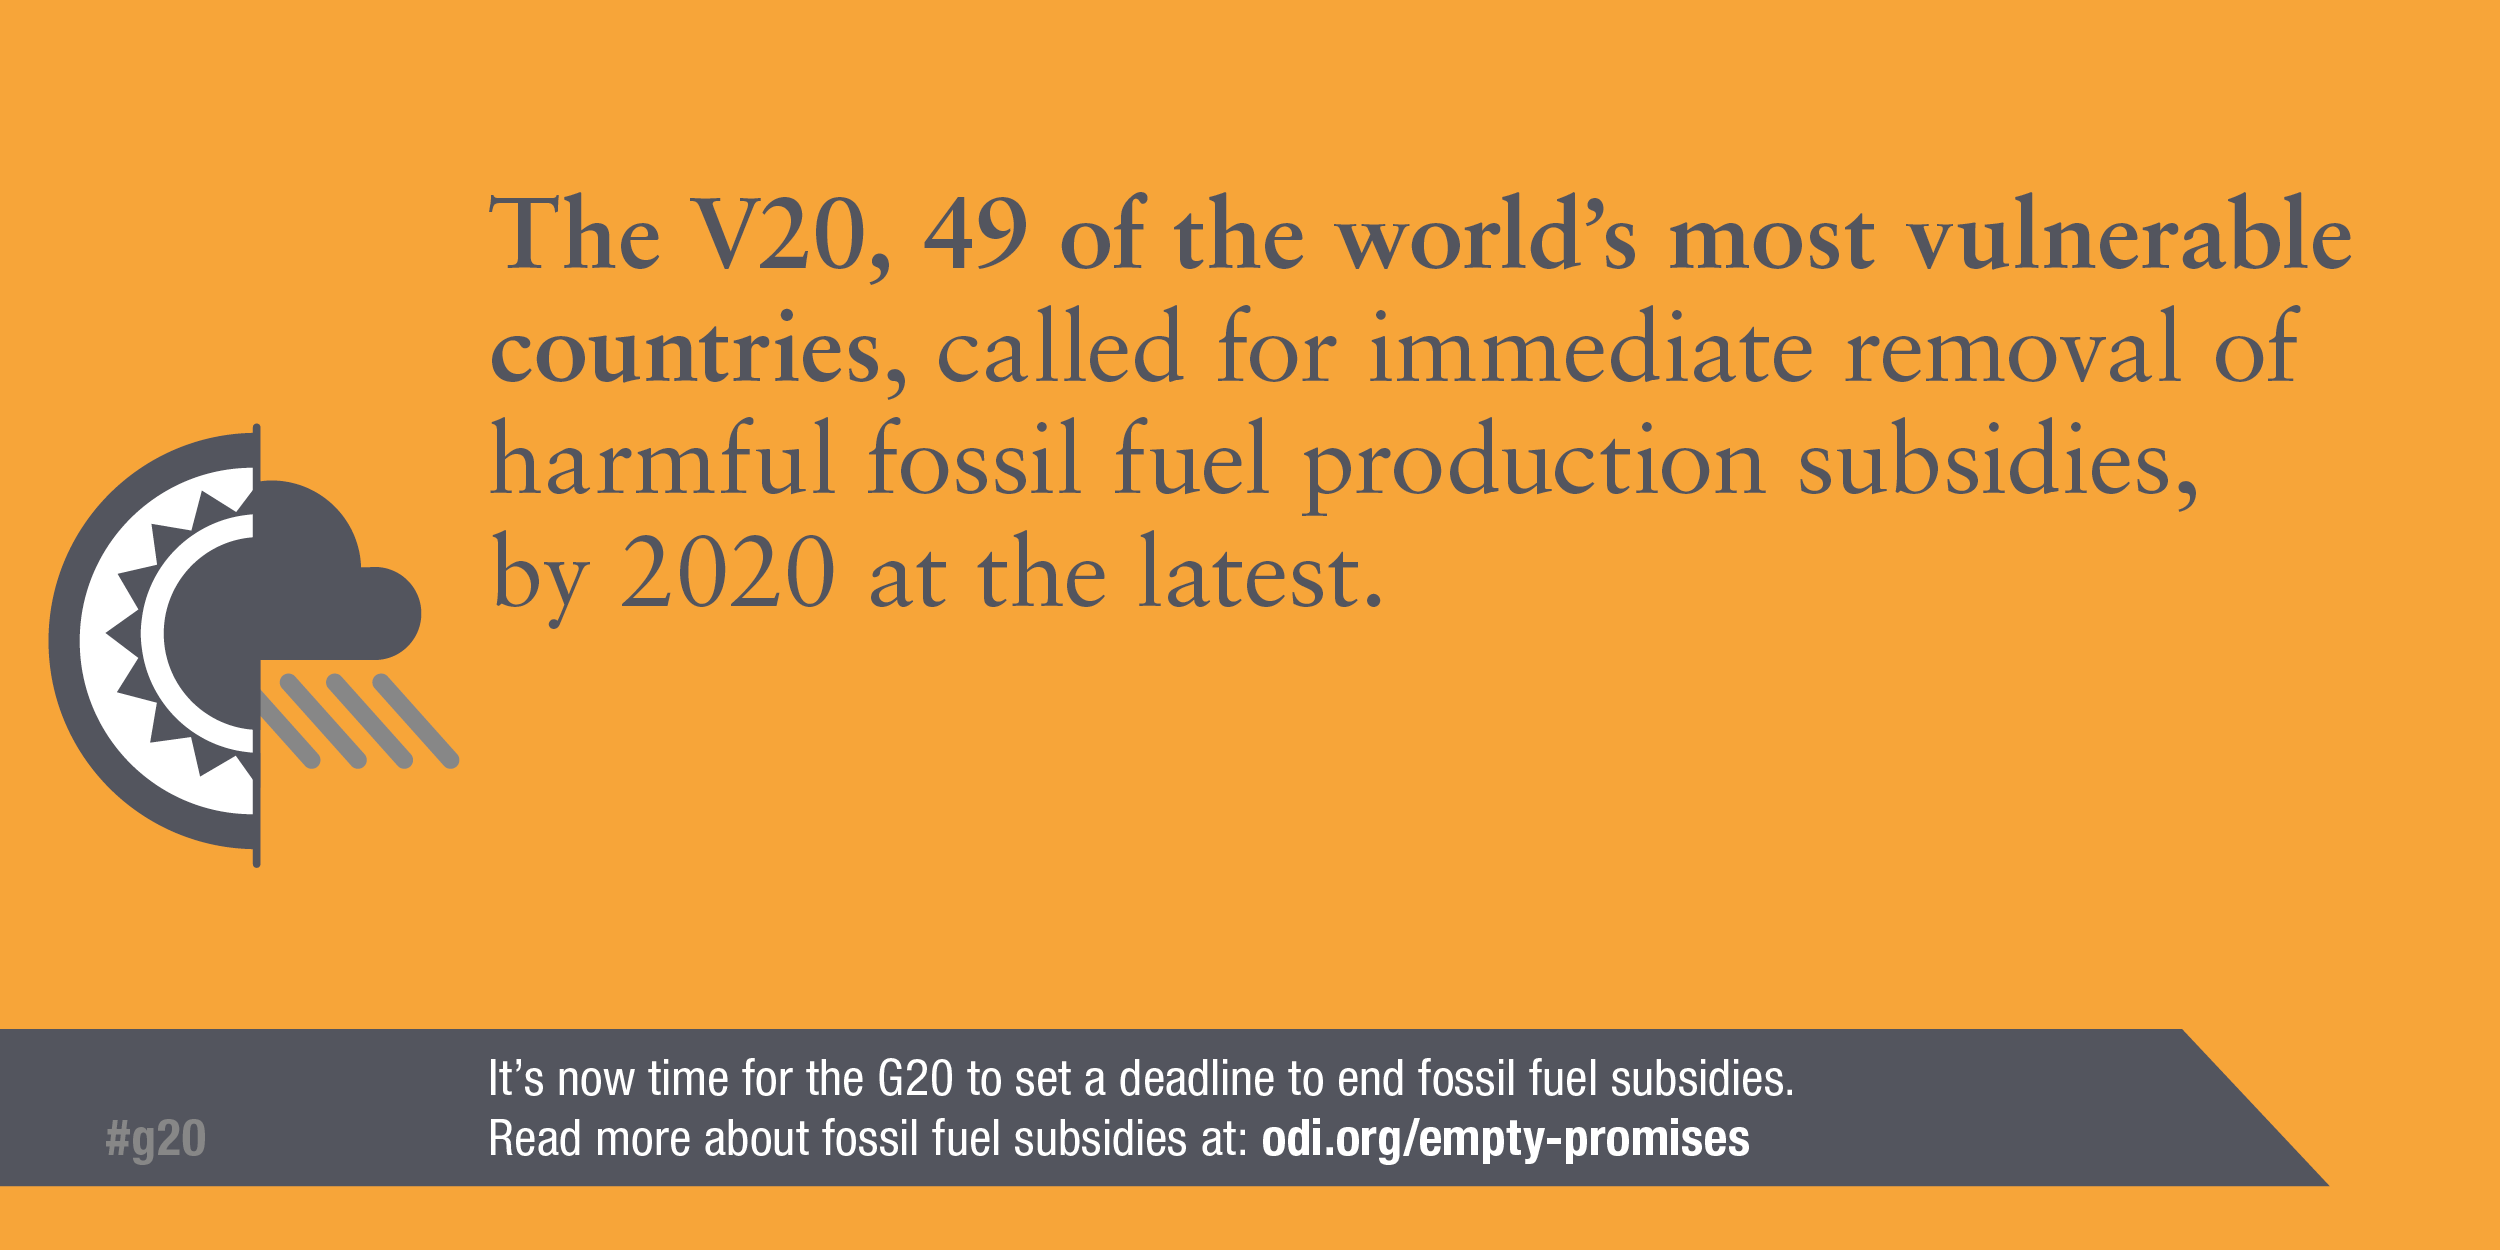 Infographic: The world's most vulnerable countries support the immediate removal of fossil fuel subsidies by 2020 at the latest